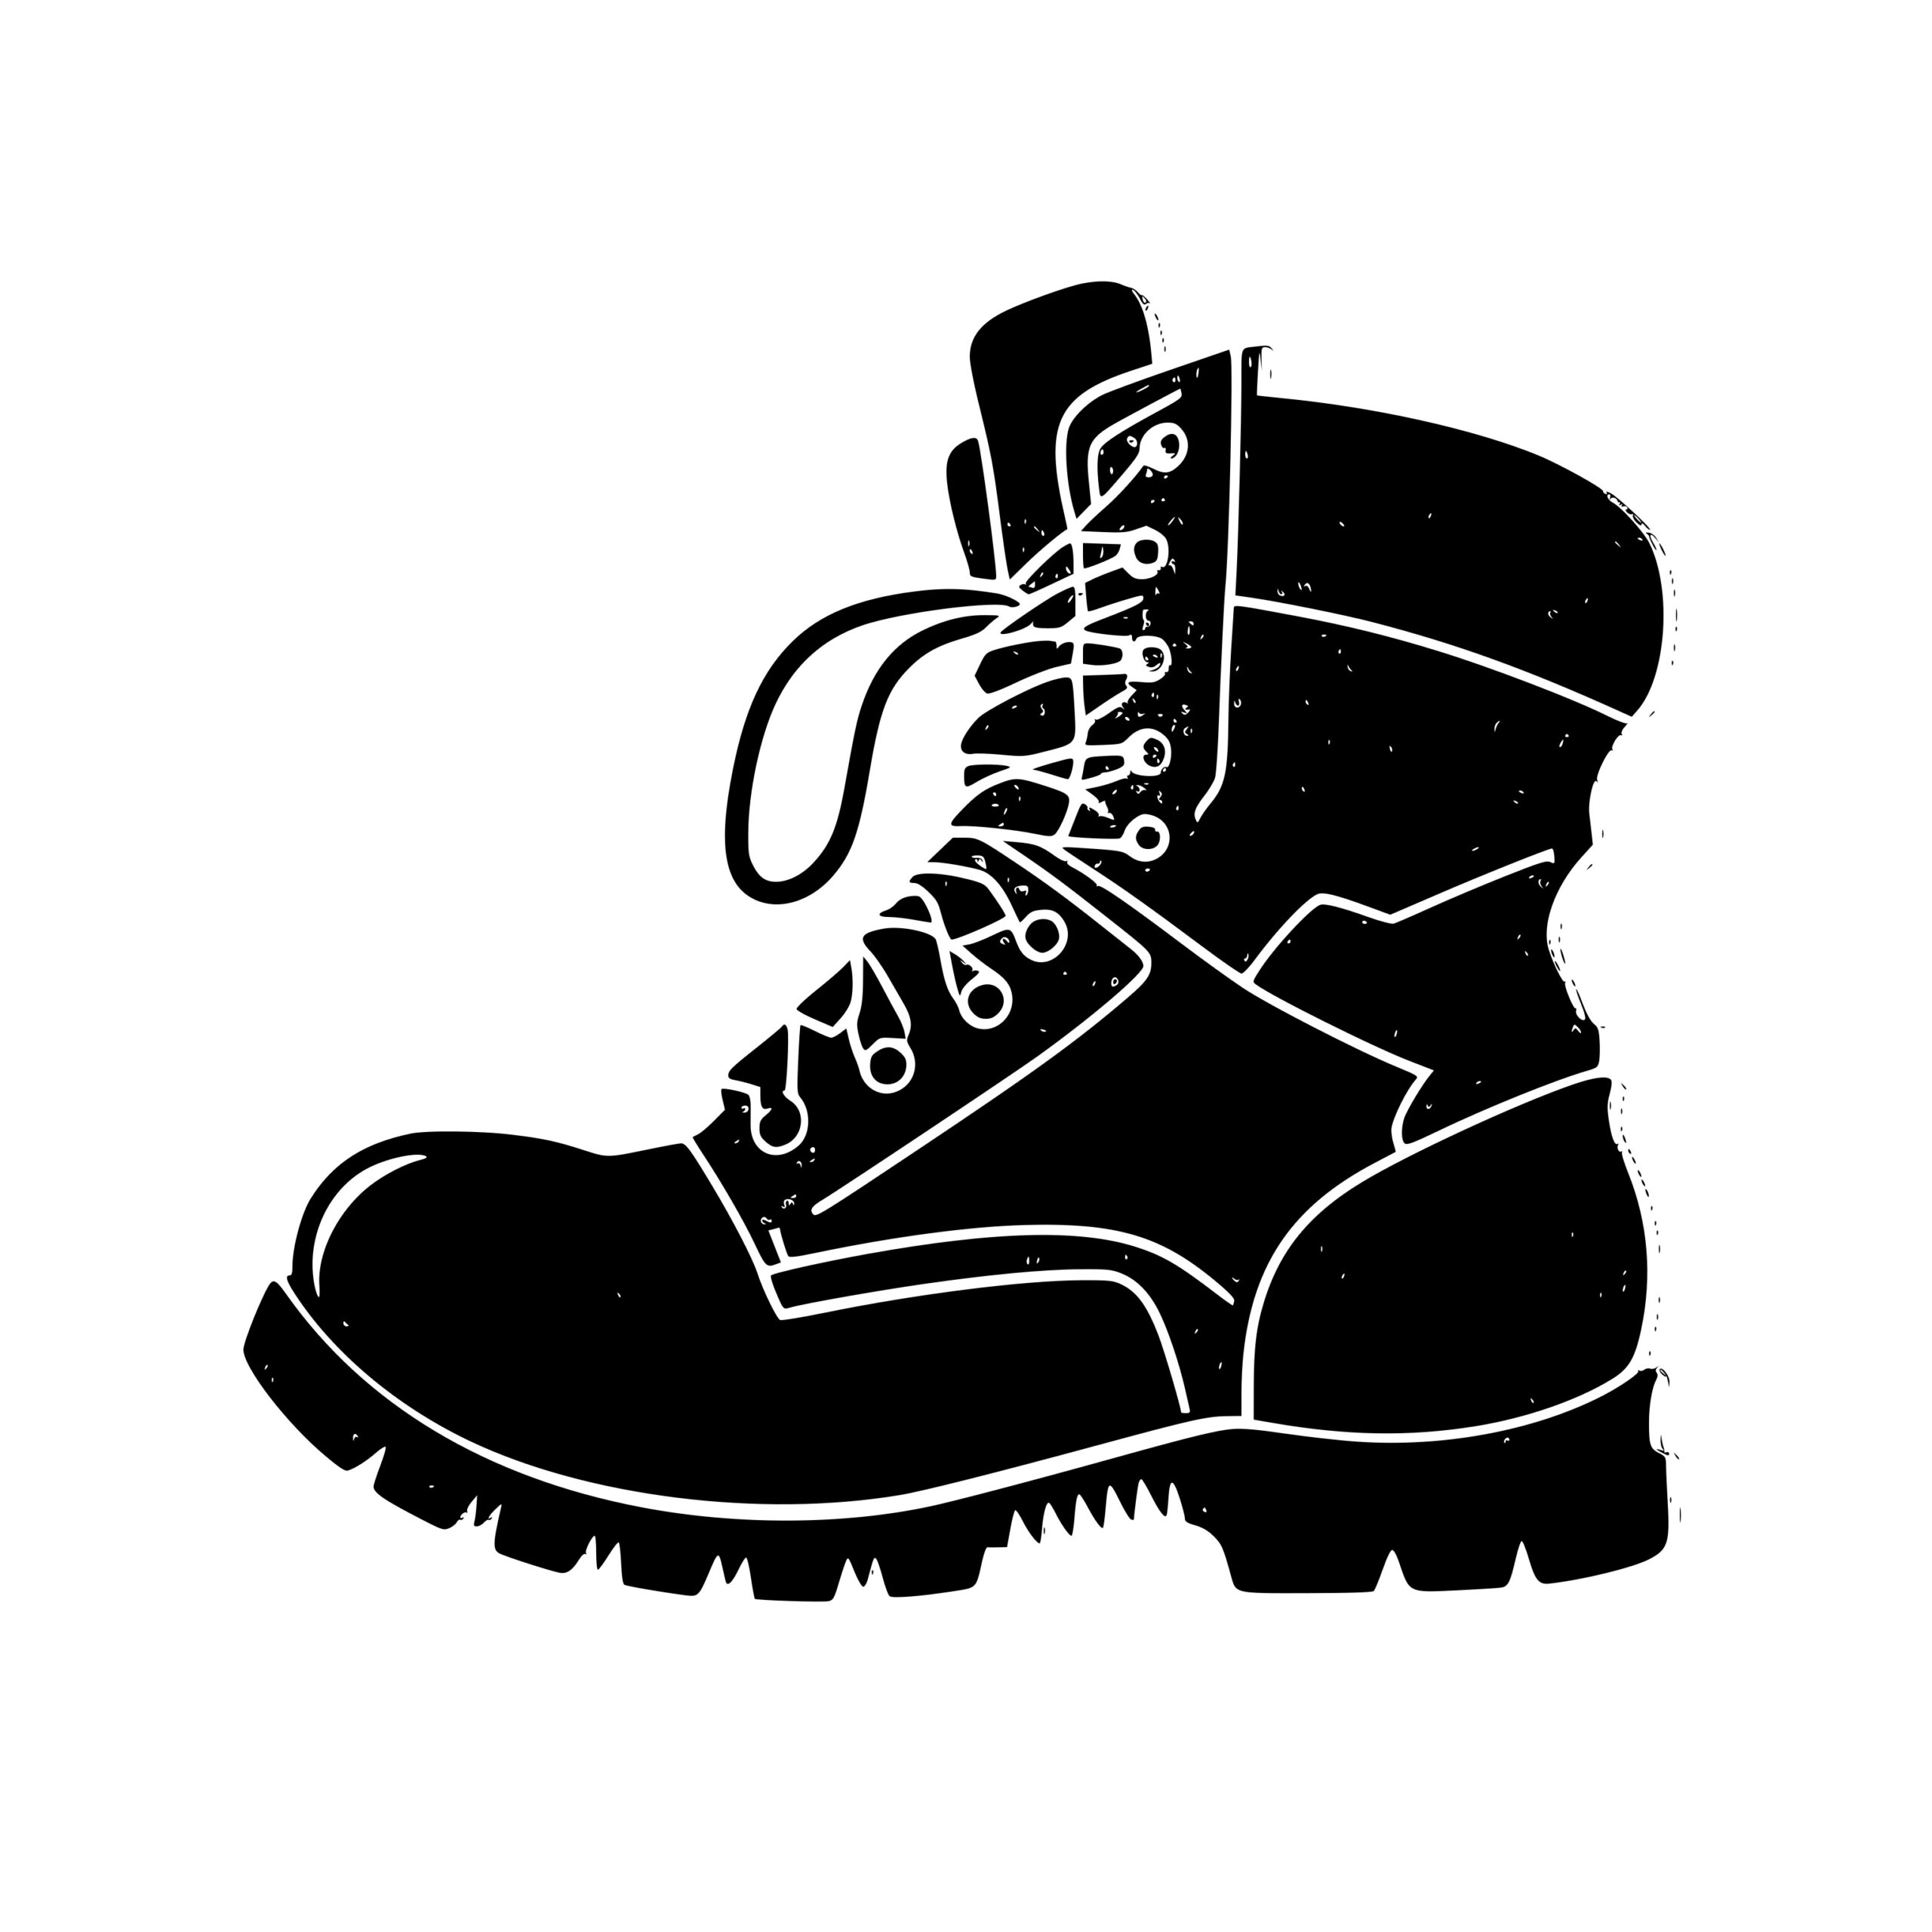 Work Boots SVG, PNG, DXF Files for Cricut, Silhouette, Laser Machines